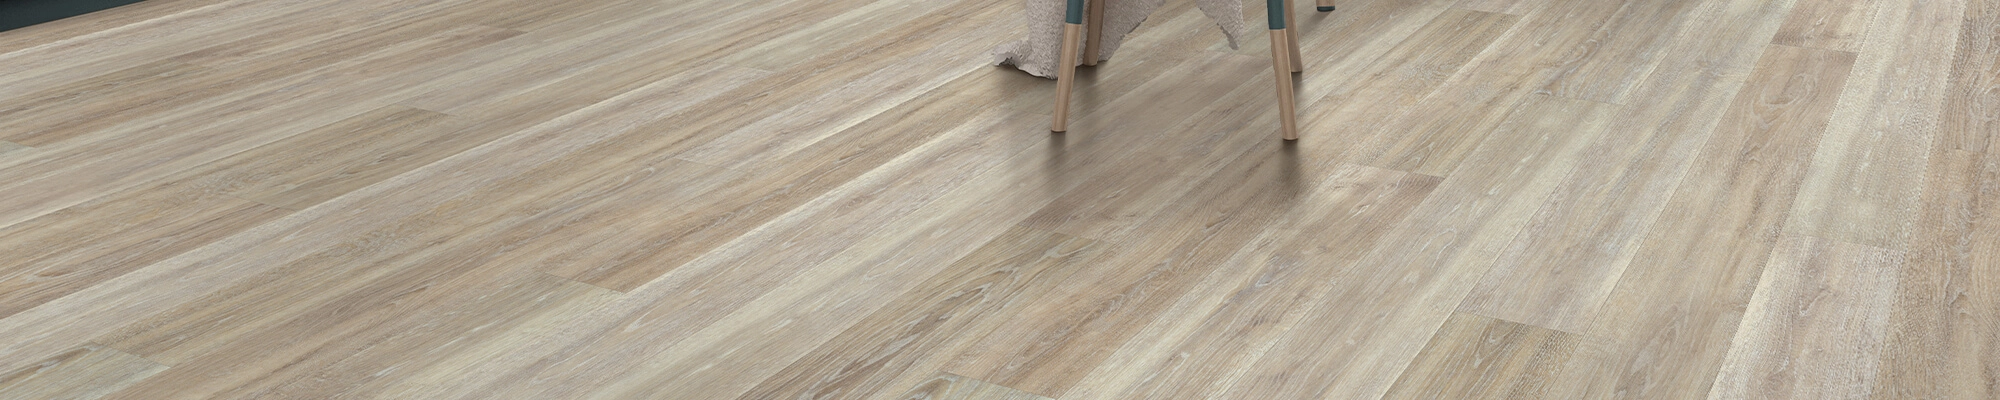 Local Flooring Retailer in Youngtown